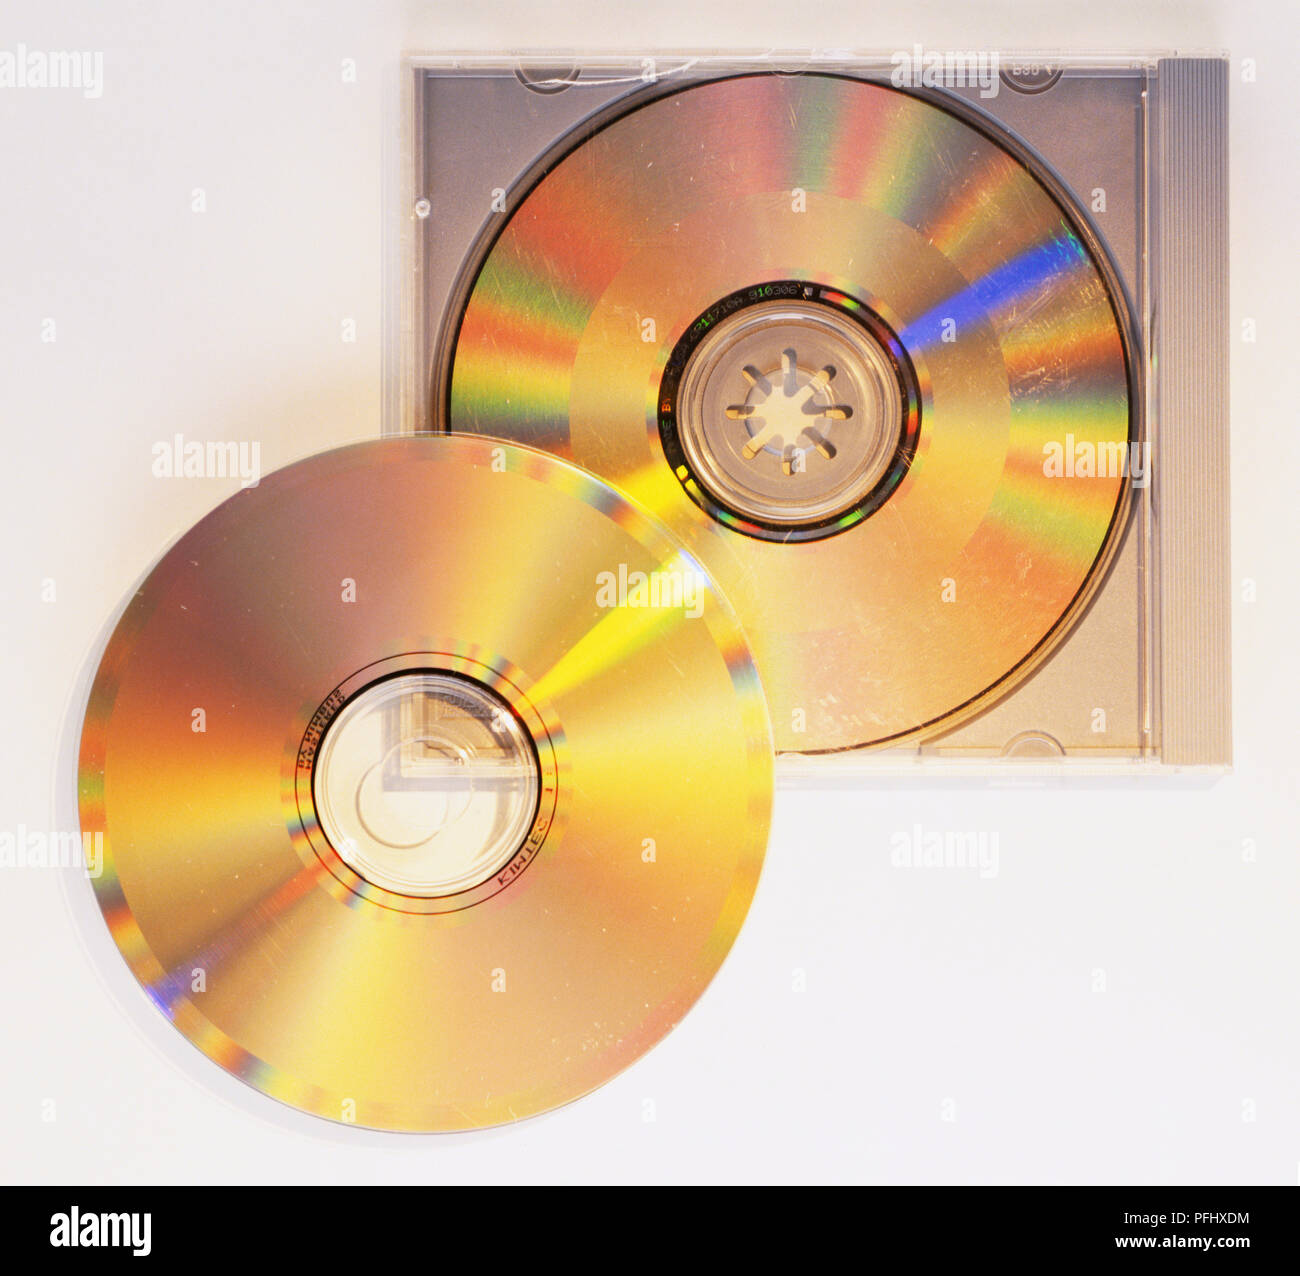 CD in and out of case, front view. Stock Photo